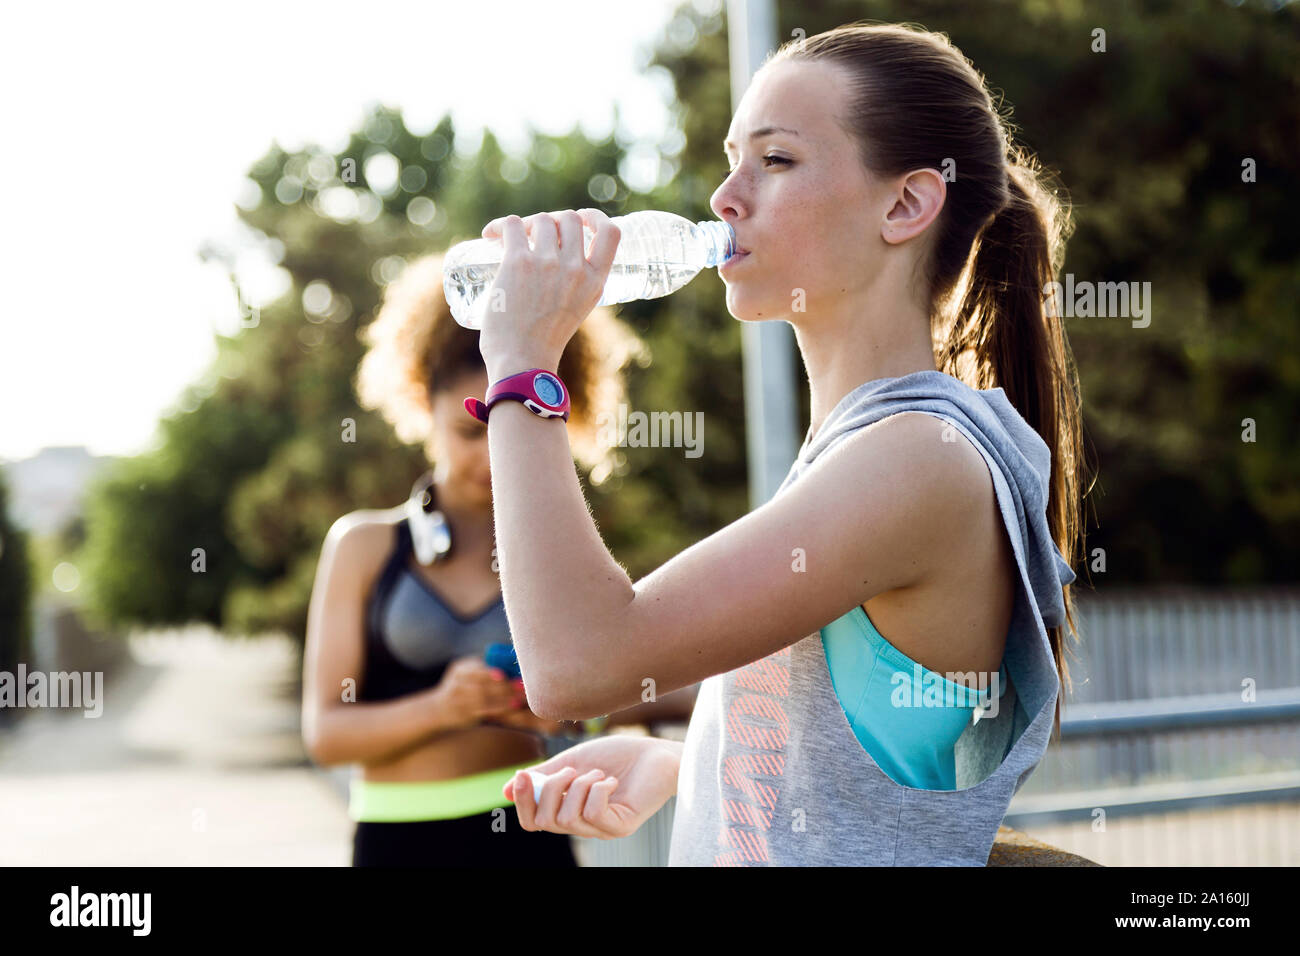 Two sporty young women finishing their workout Stock Photo